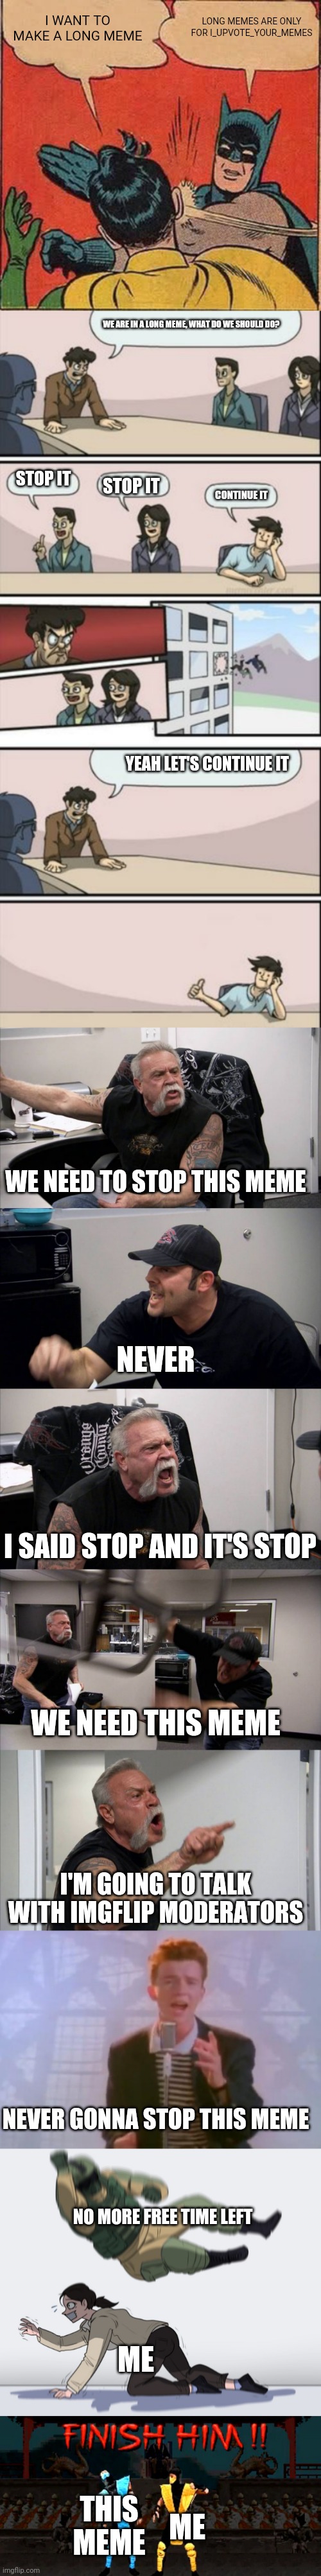 I WANT TO MAKE A LONG MEME; LONG MEMES ARE ONLY FOR I_UPVOTE_YOUR_MEMES; WE ARE IN A LONG MEME, WHAT DO WE SHOULD DO? STOP IT; STOP IT; CONTINUE IT; YEAH LET'S CONTINUE IT; WE NEED TO STOP THIS MEME; NEVER; I SAID STOP AND IT'S STOP; WE NEED THIS MEME; I'M GOING TO TALK WITH IMGFLIP MODERATORS; NEVER GONNA STOP THIS MEME; NO MORE FREE TIME LEFT; ME; THIS MEME; ME | image tagged in memes,batman slapping robin,boardroom meeting sugg 2,american chopper argument,rick astley,rainbow six - fuze the hostage | made w/ Imgflip meme maker